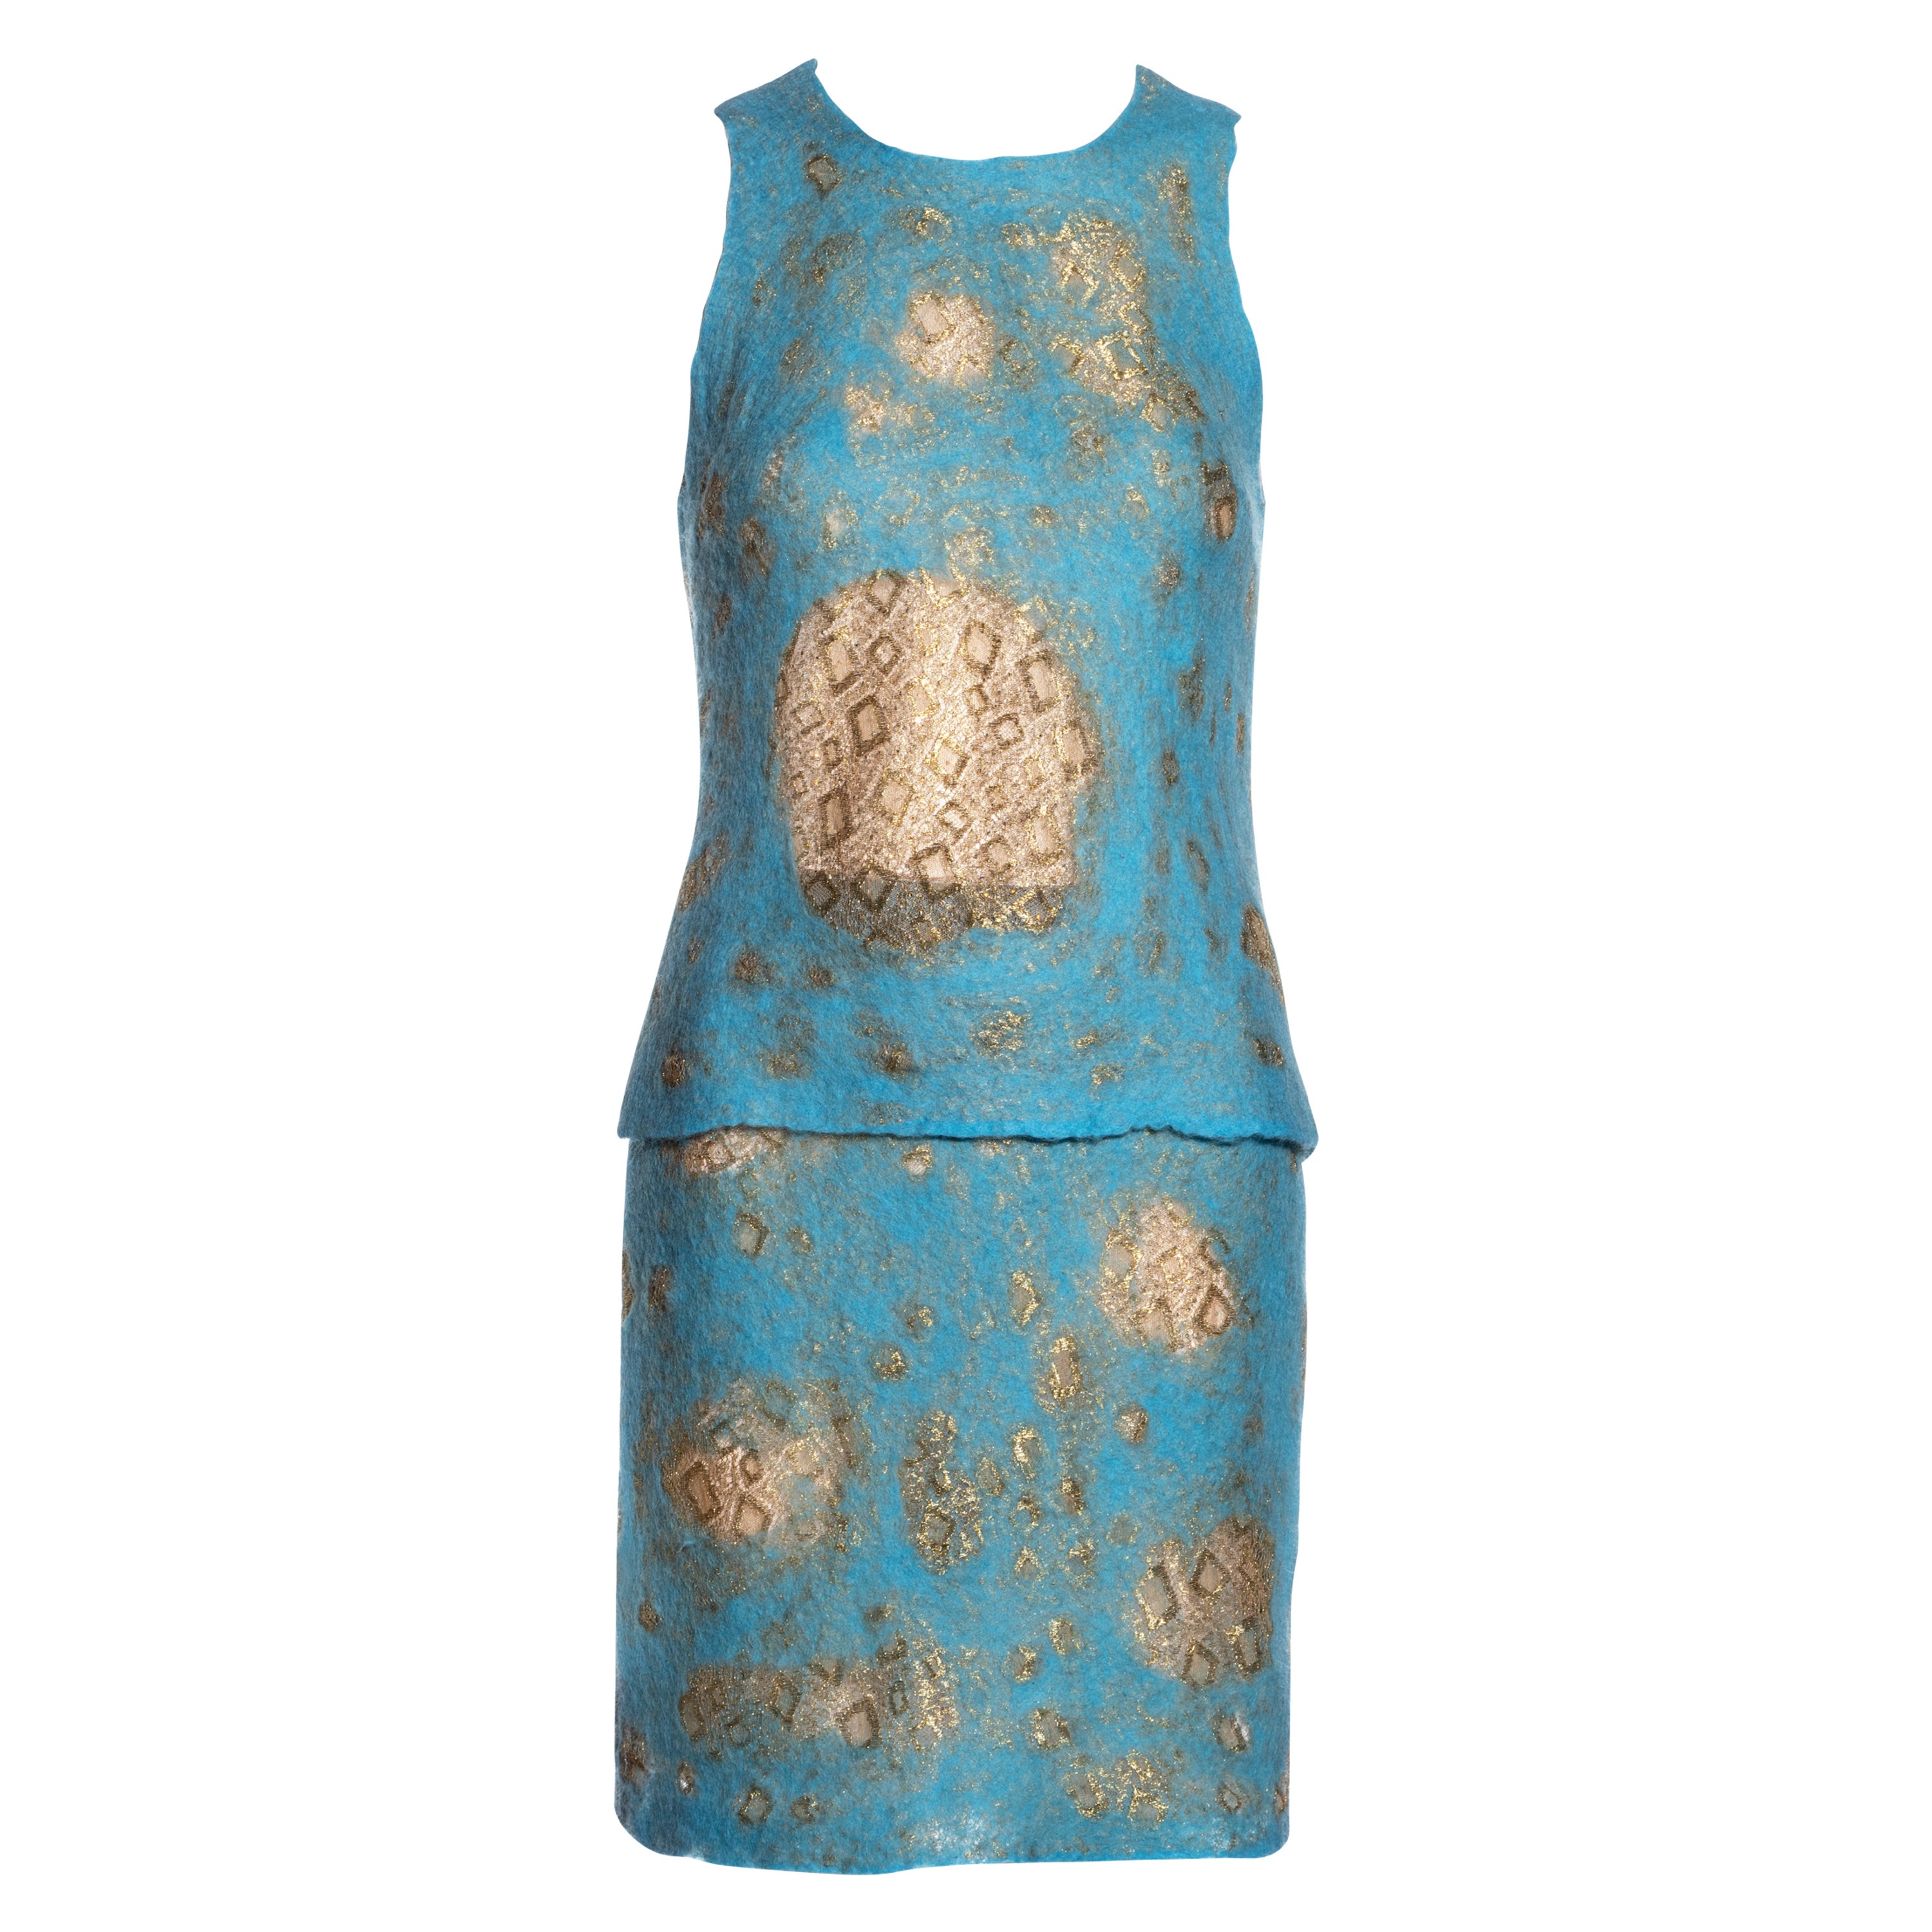 Gianni Versace aqua blue felted wool and gold lace top and skirt set, ss 1999